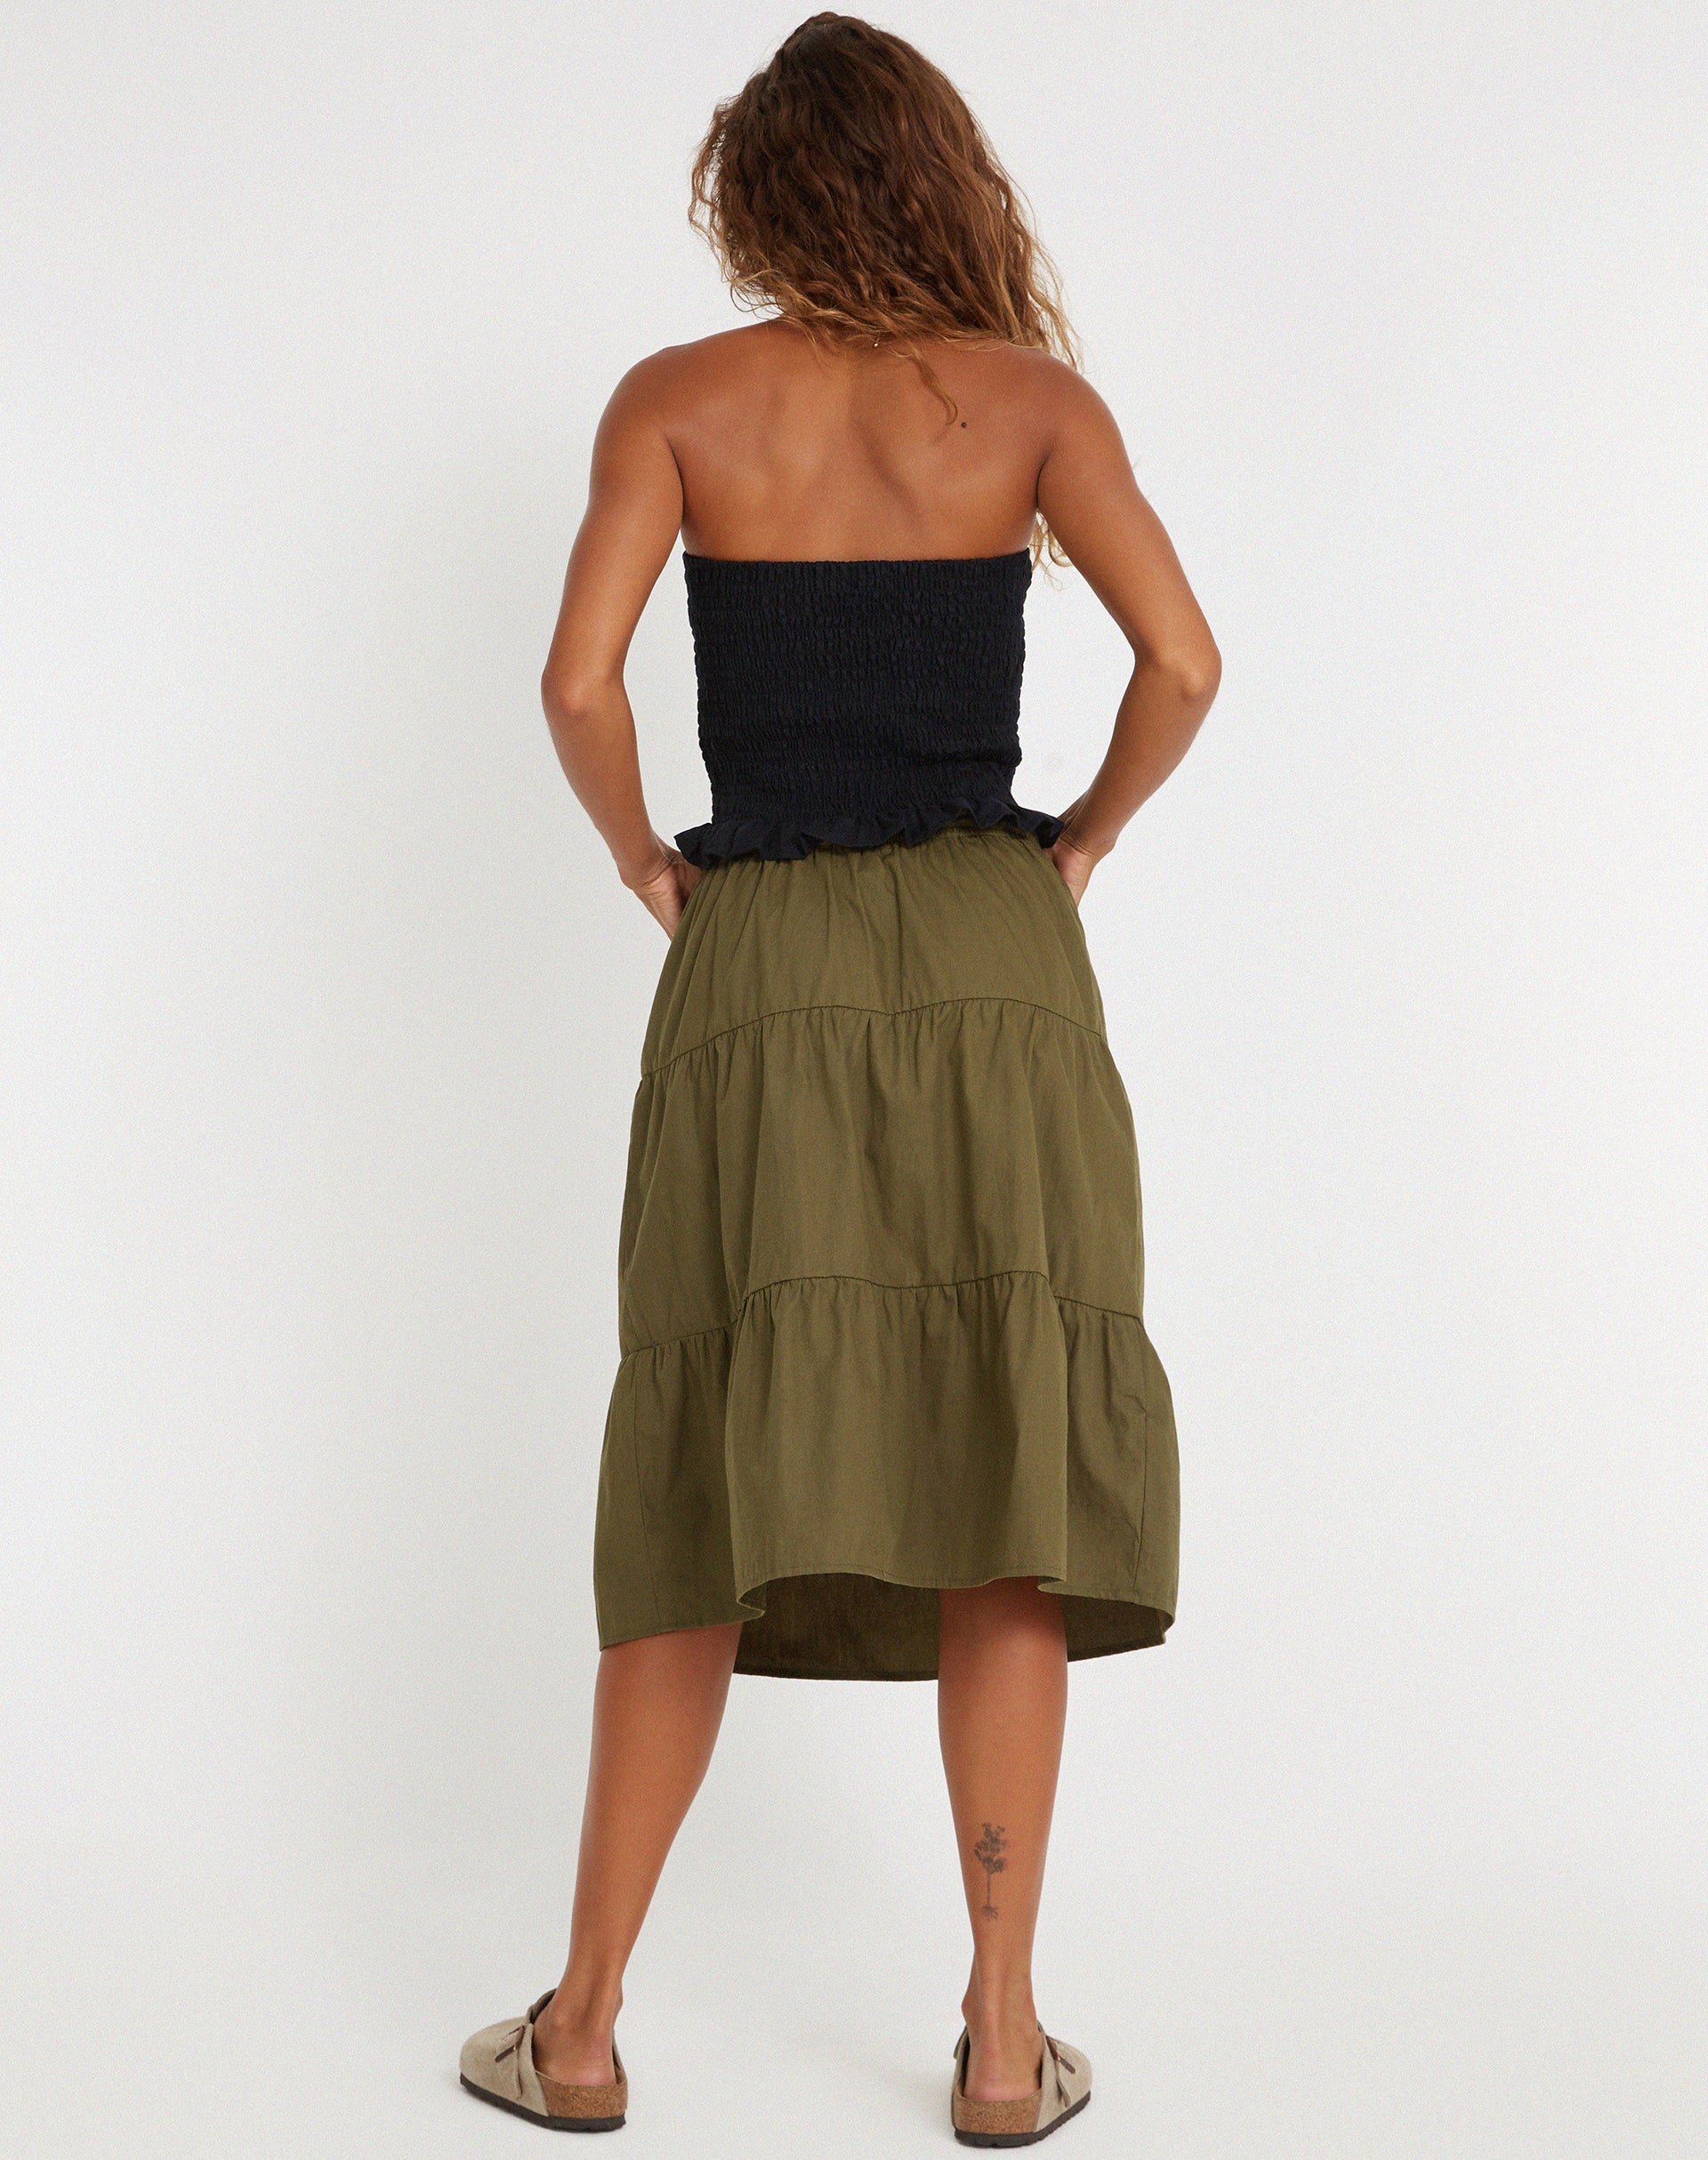 image of Reef Midi Skirt in Loden Green